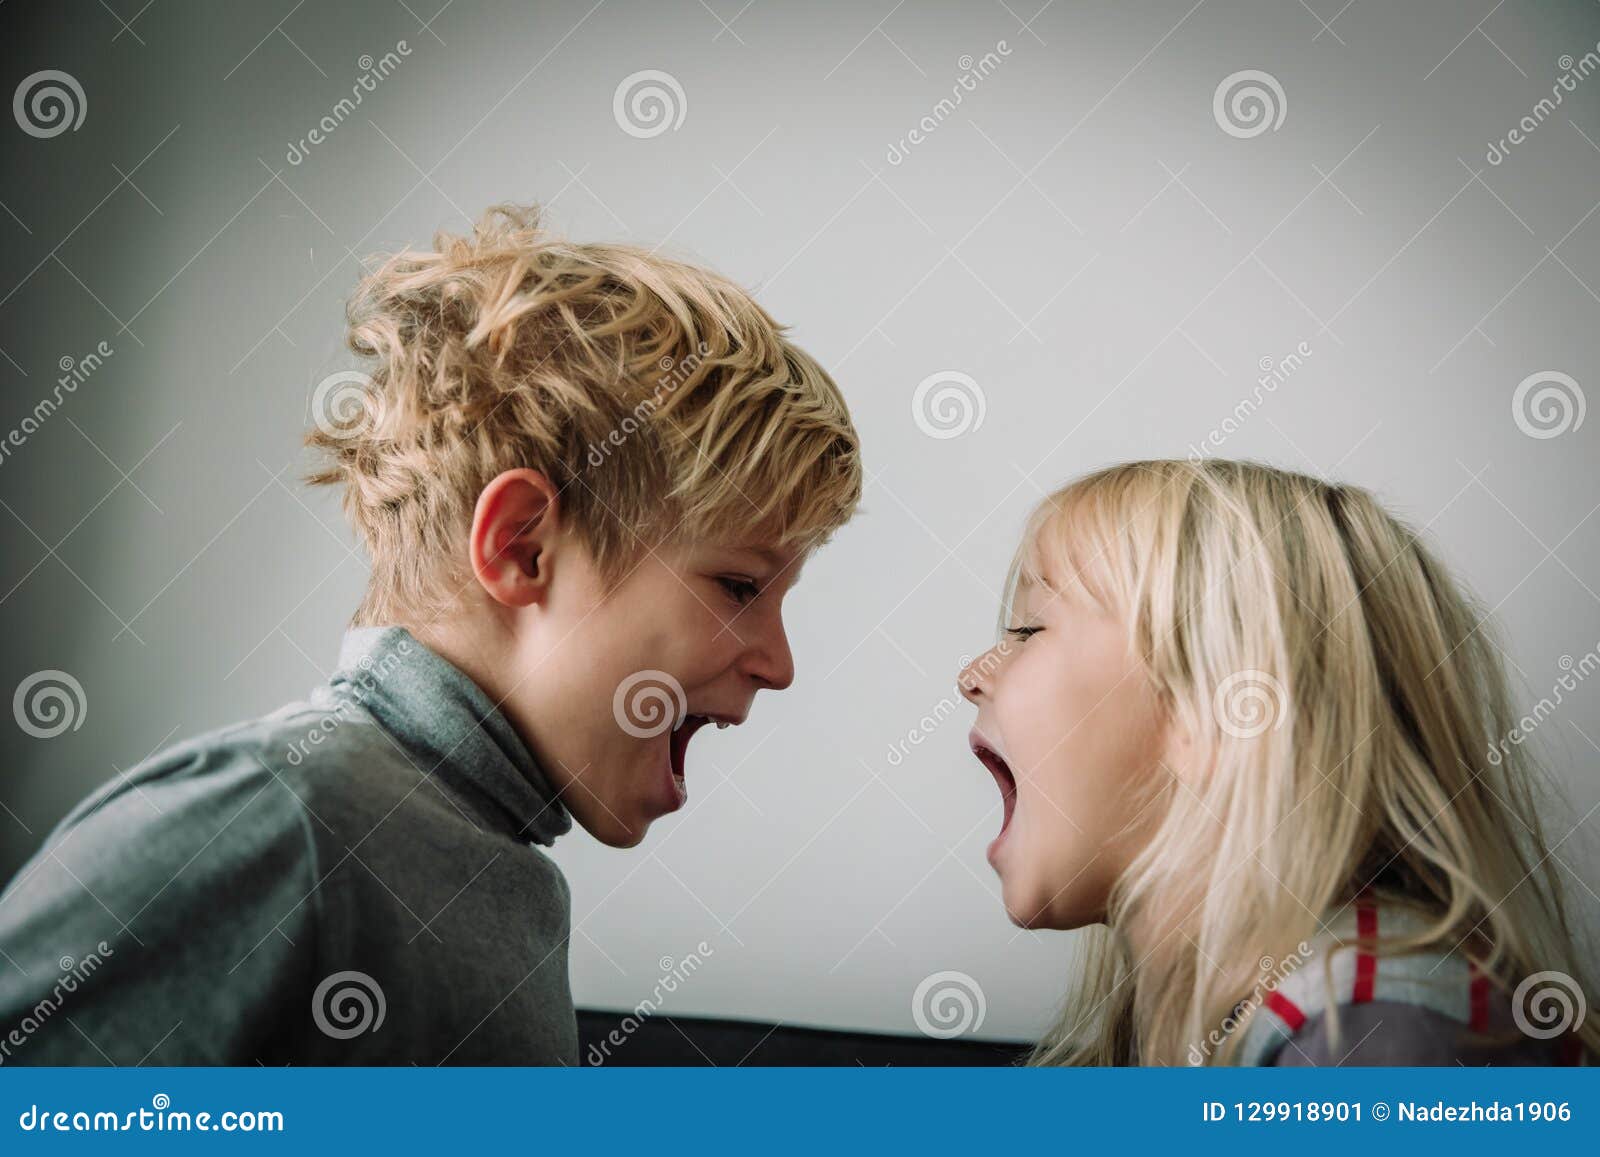 Brother And Sister Shout, Concept Of Rivalry, Dispute